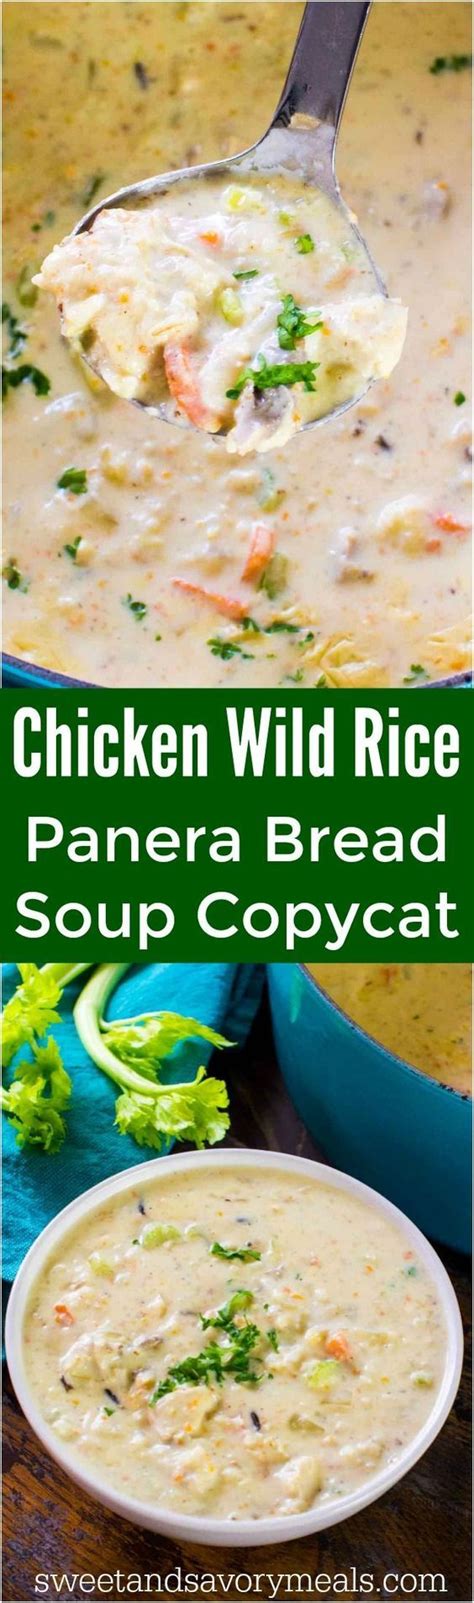 Chicken soup is very useful and dietary, at the same time they are nutritious and nutritious and do not contain many calories. Panera Bread Chicken Wild Rice Soup Copycat [VIDEO ...